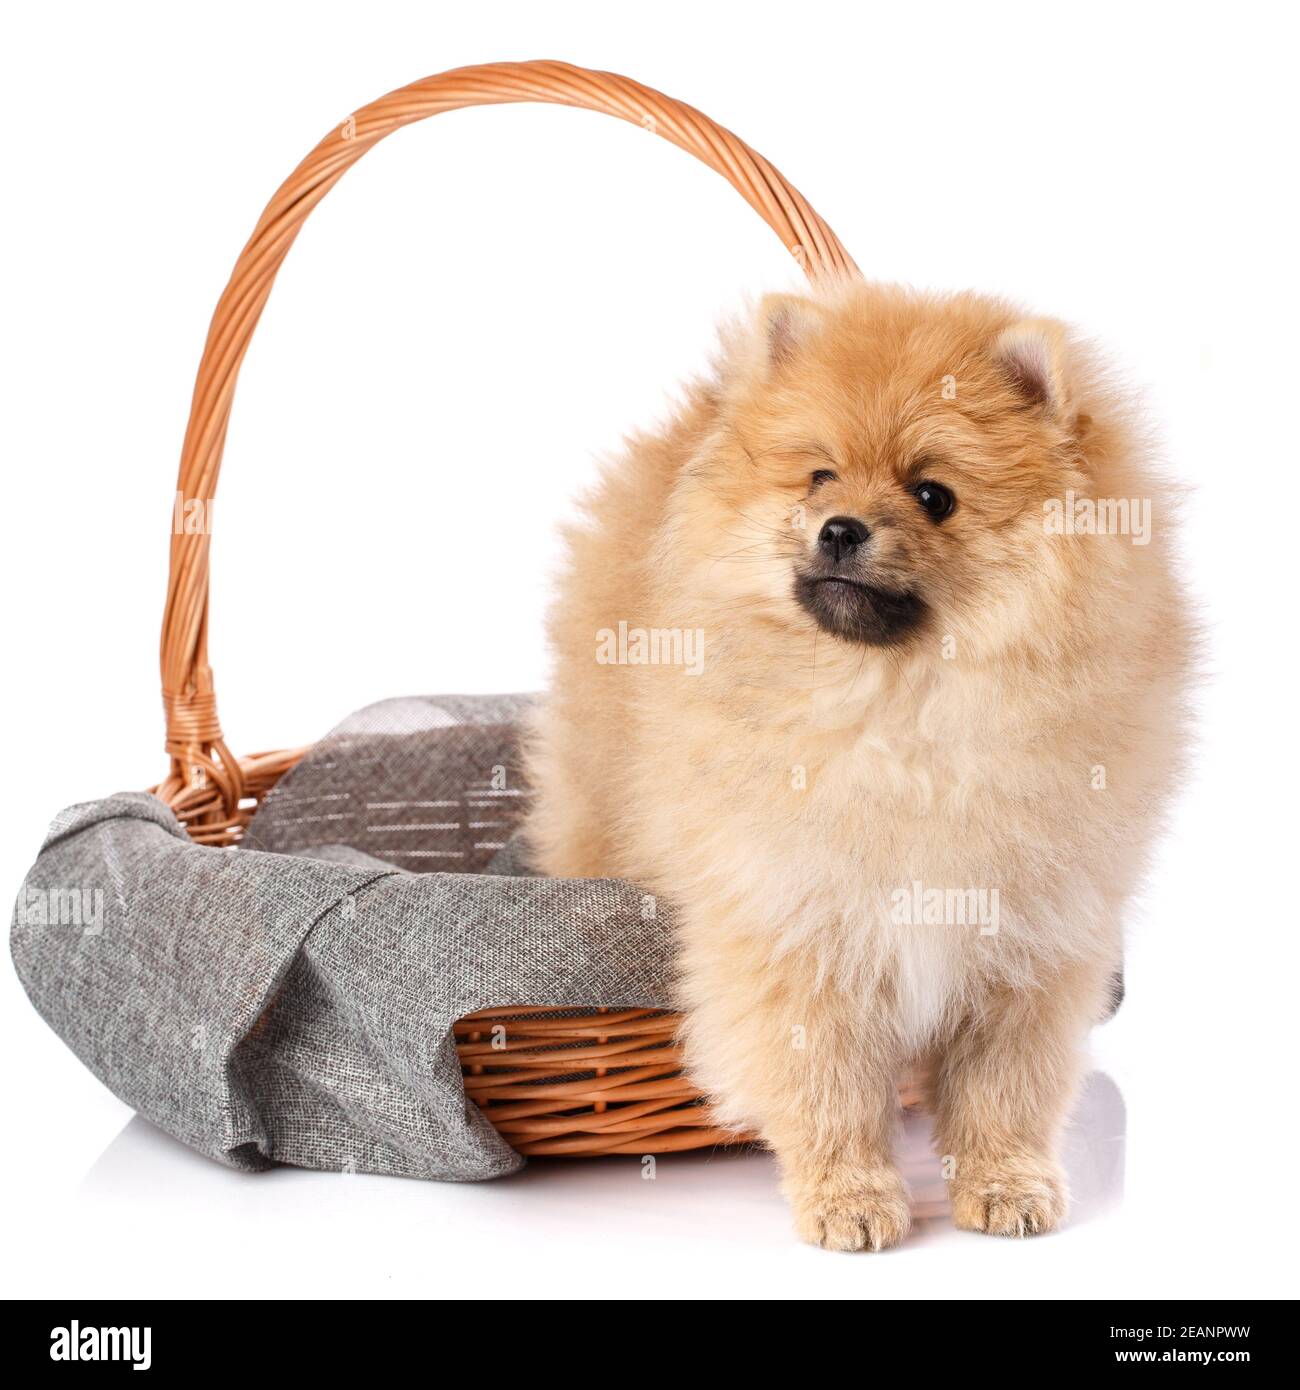 Beautiful dog Pomeranian Spitz climbs out of a wicker basket and looks away. Stock Photo